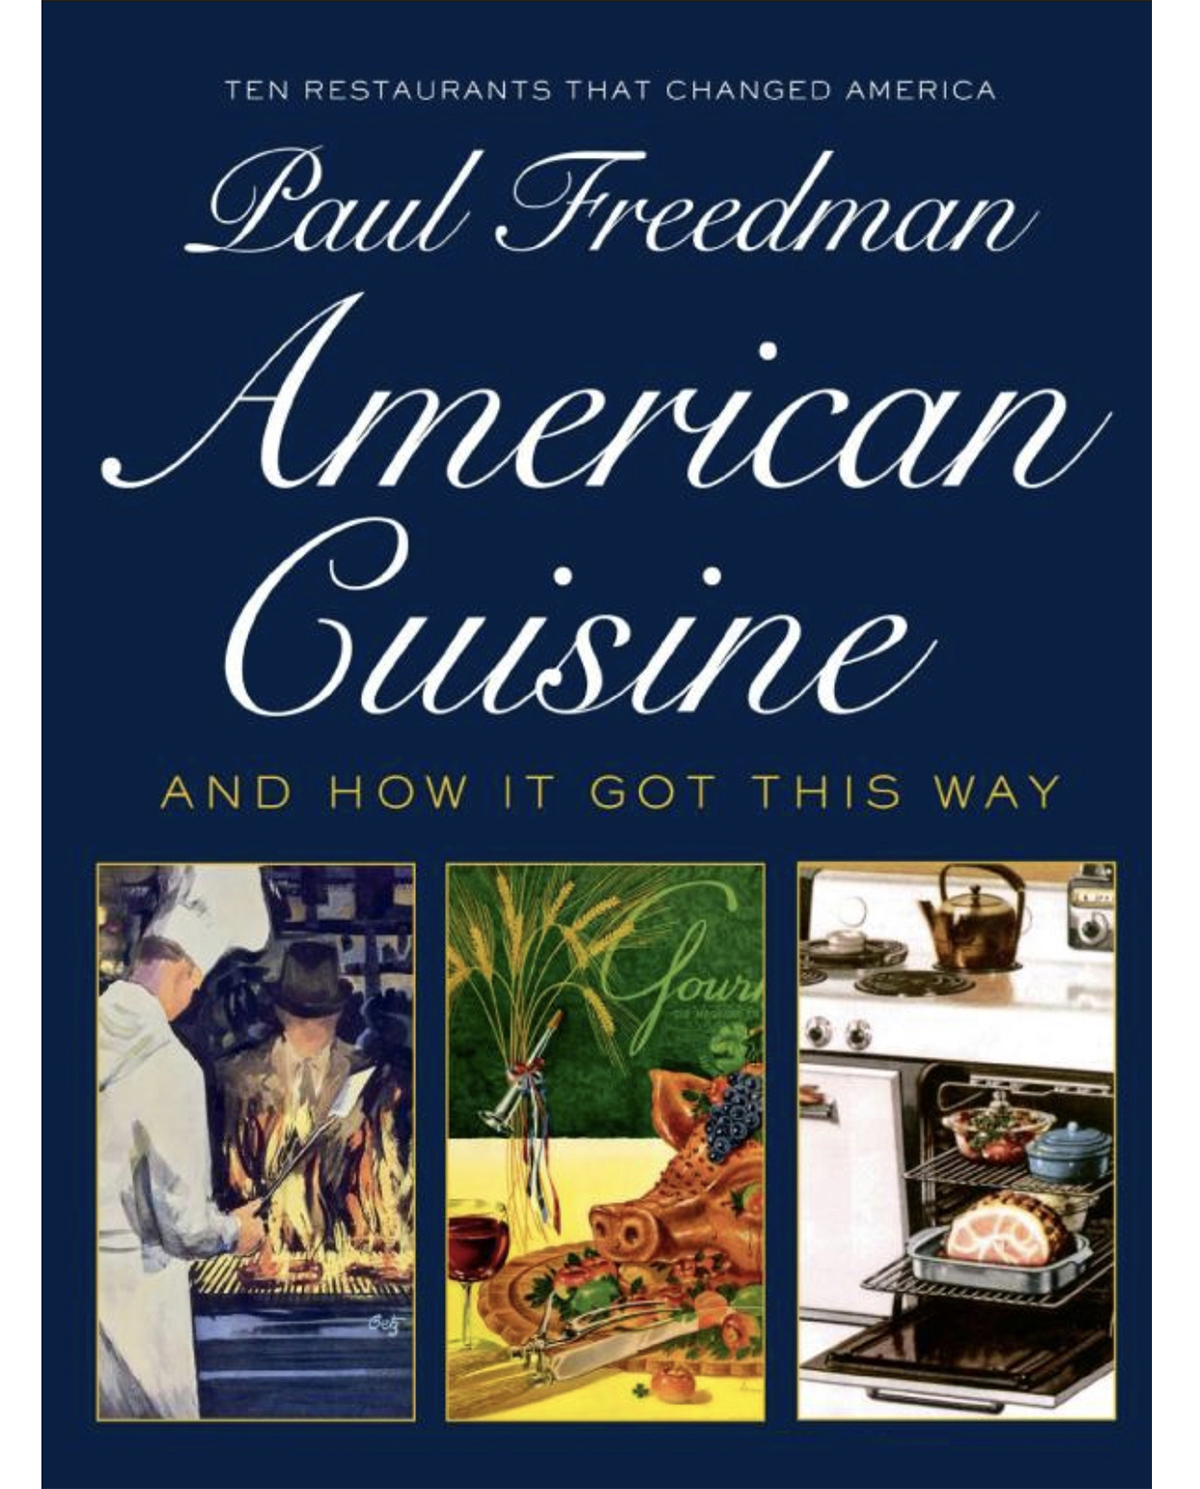 Paul Freedman, author of American Cuisine at the Milford Readers and Writers Festival